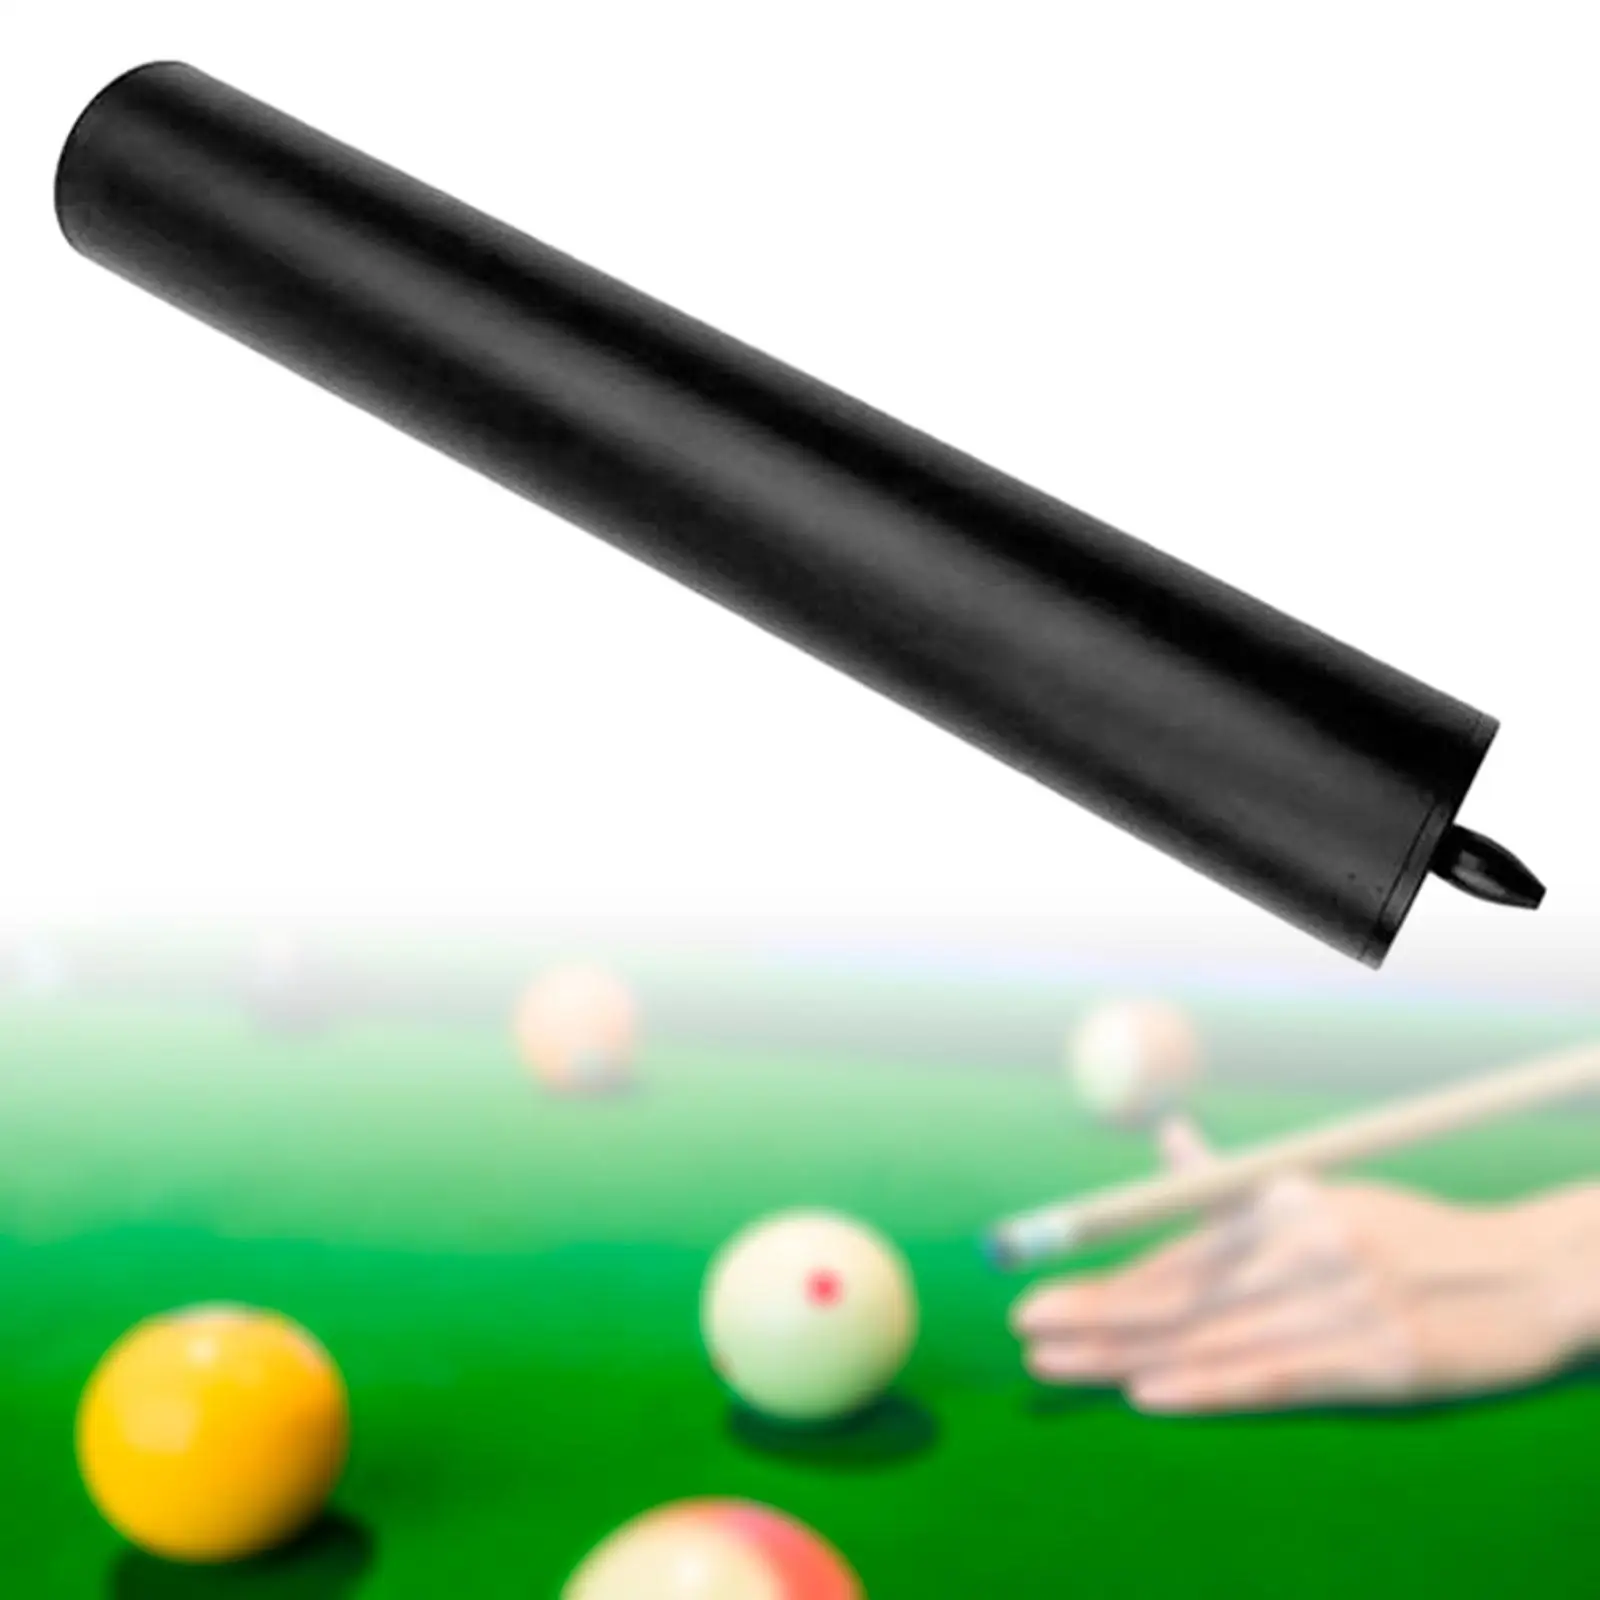 Pool Cue Extender Compact Billiards Pool Cue Extension Snooker Cue Extension for Snooker Enthusiast Athlete Beginners Accessory